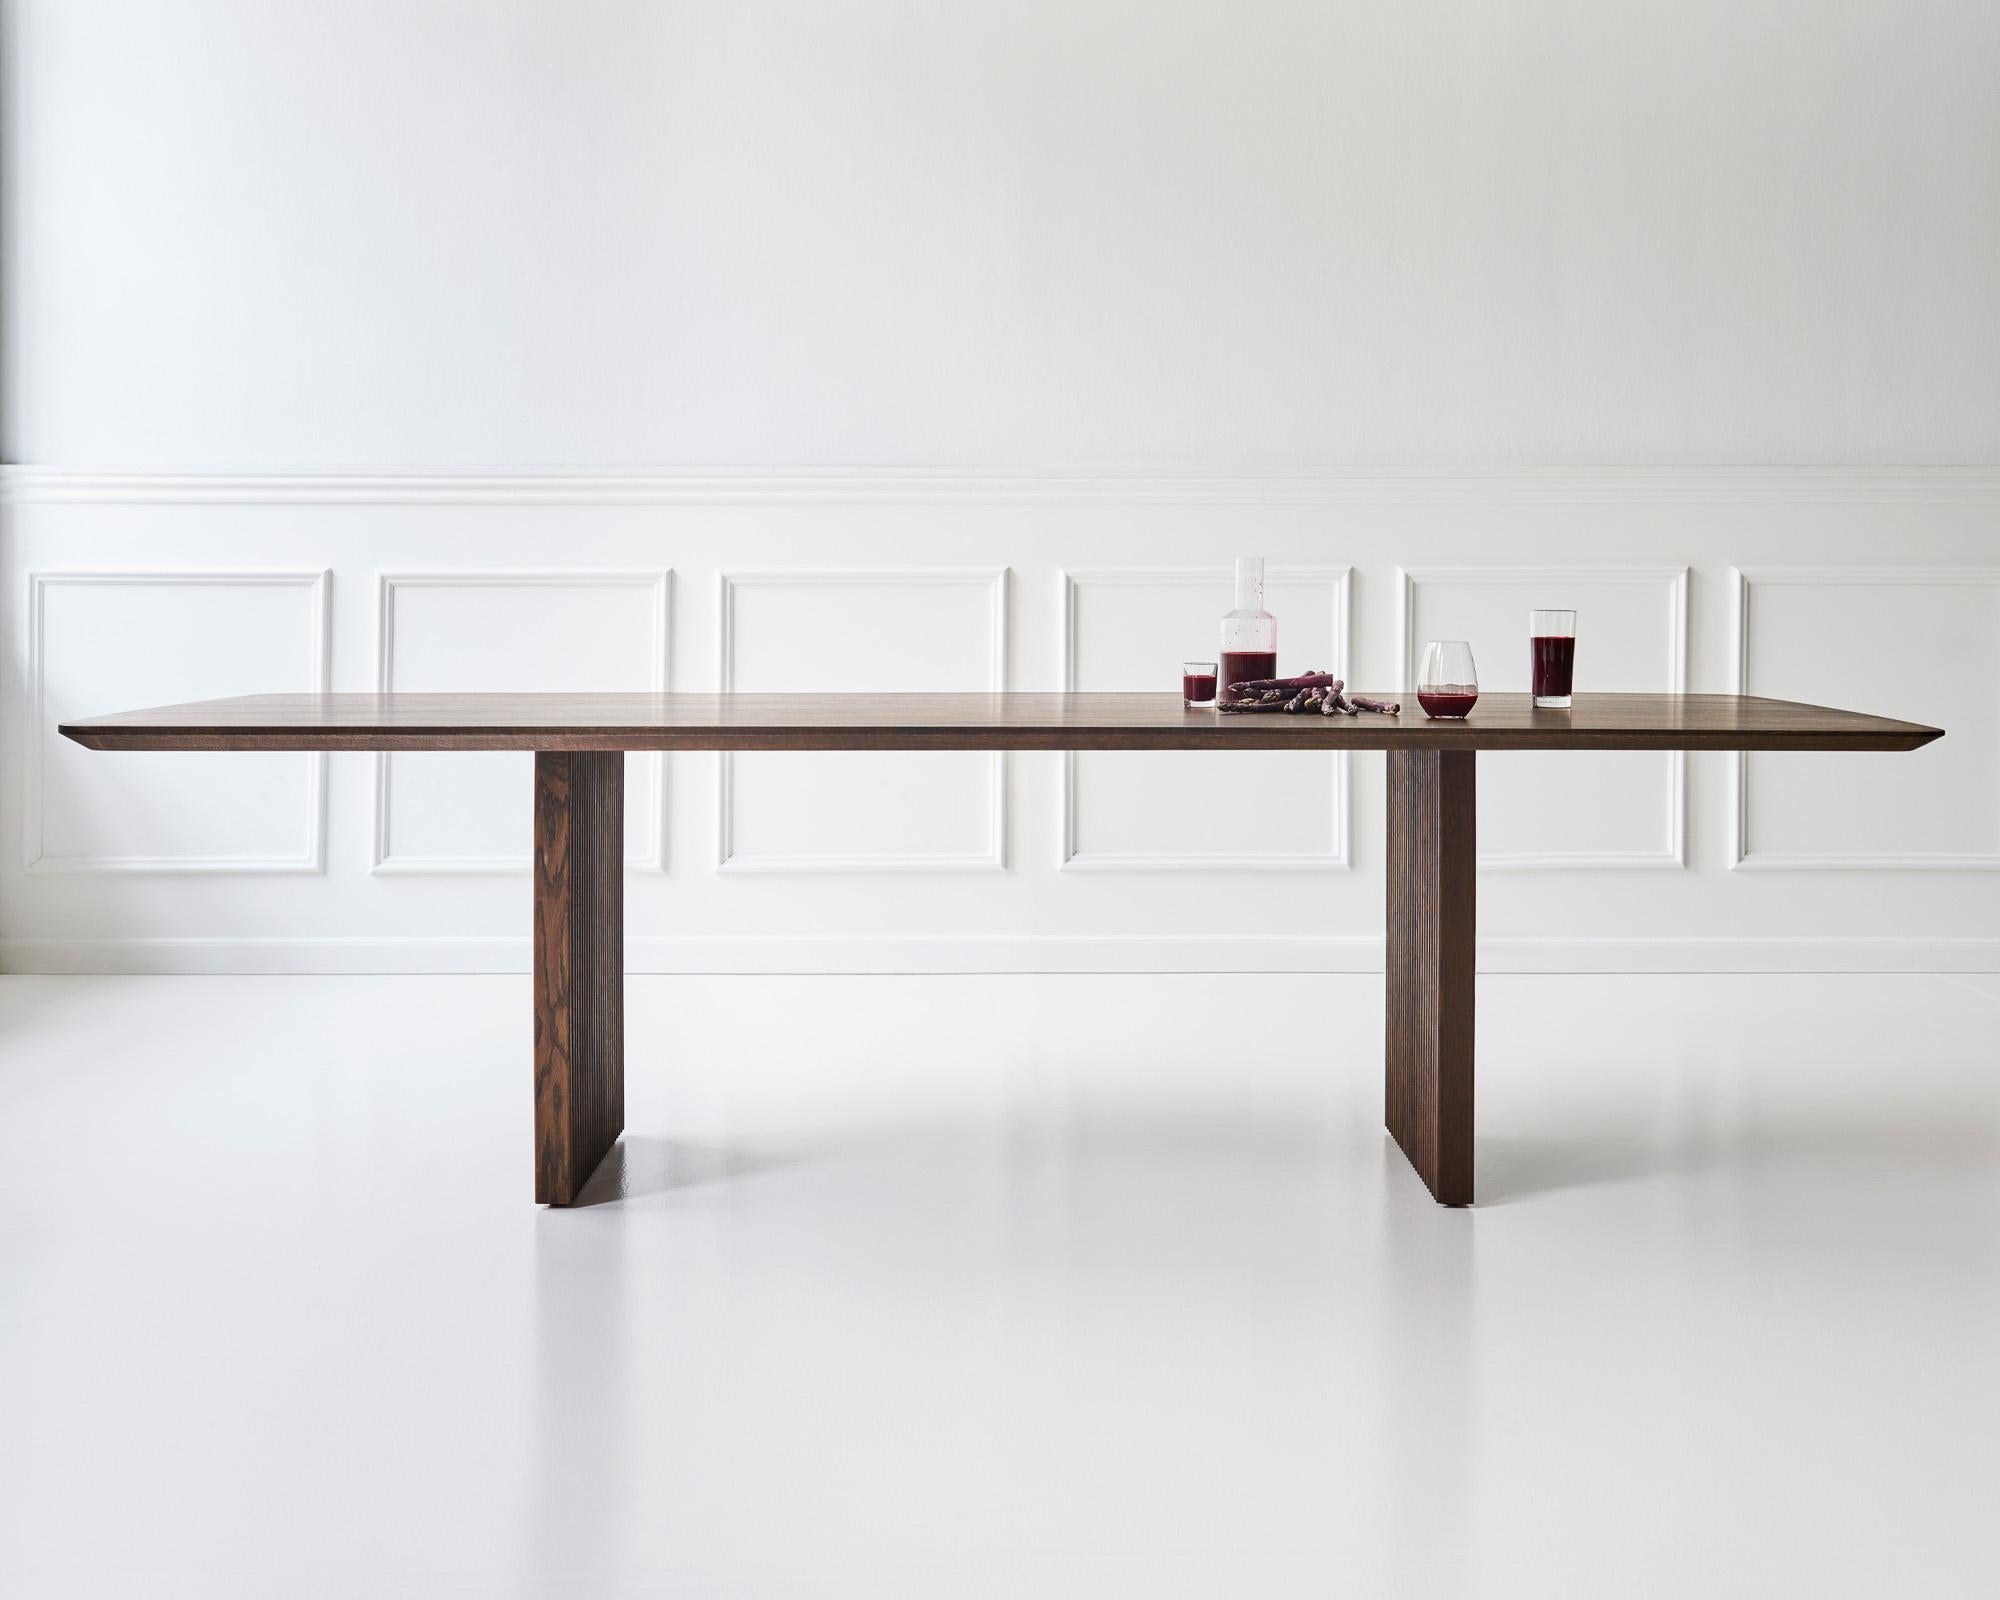 TEN dining table, rectangular, 270cm
Solid wood tabletop and legs

Height: 72 or 74 cm

Tabletop dimensions:
– 200 x 95 cm
– 240 x 105 cm
– 270 x 105 cm
– 300 x 105 cm
– 340 x 105 cm
– 370 x 105 cm
– 400 x 105 cm

Tabletop’s thickness: